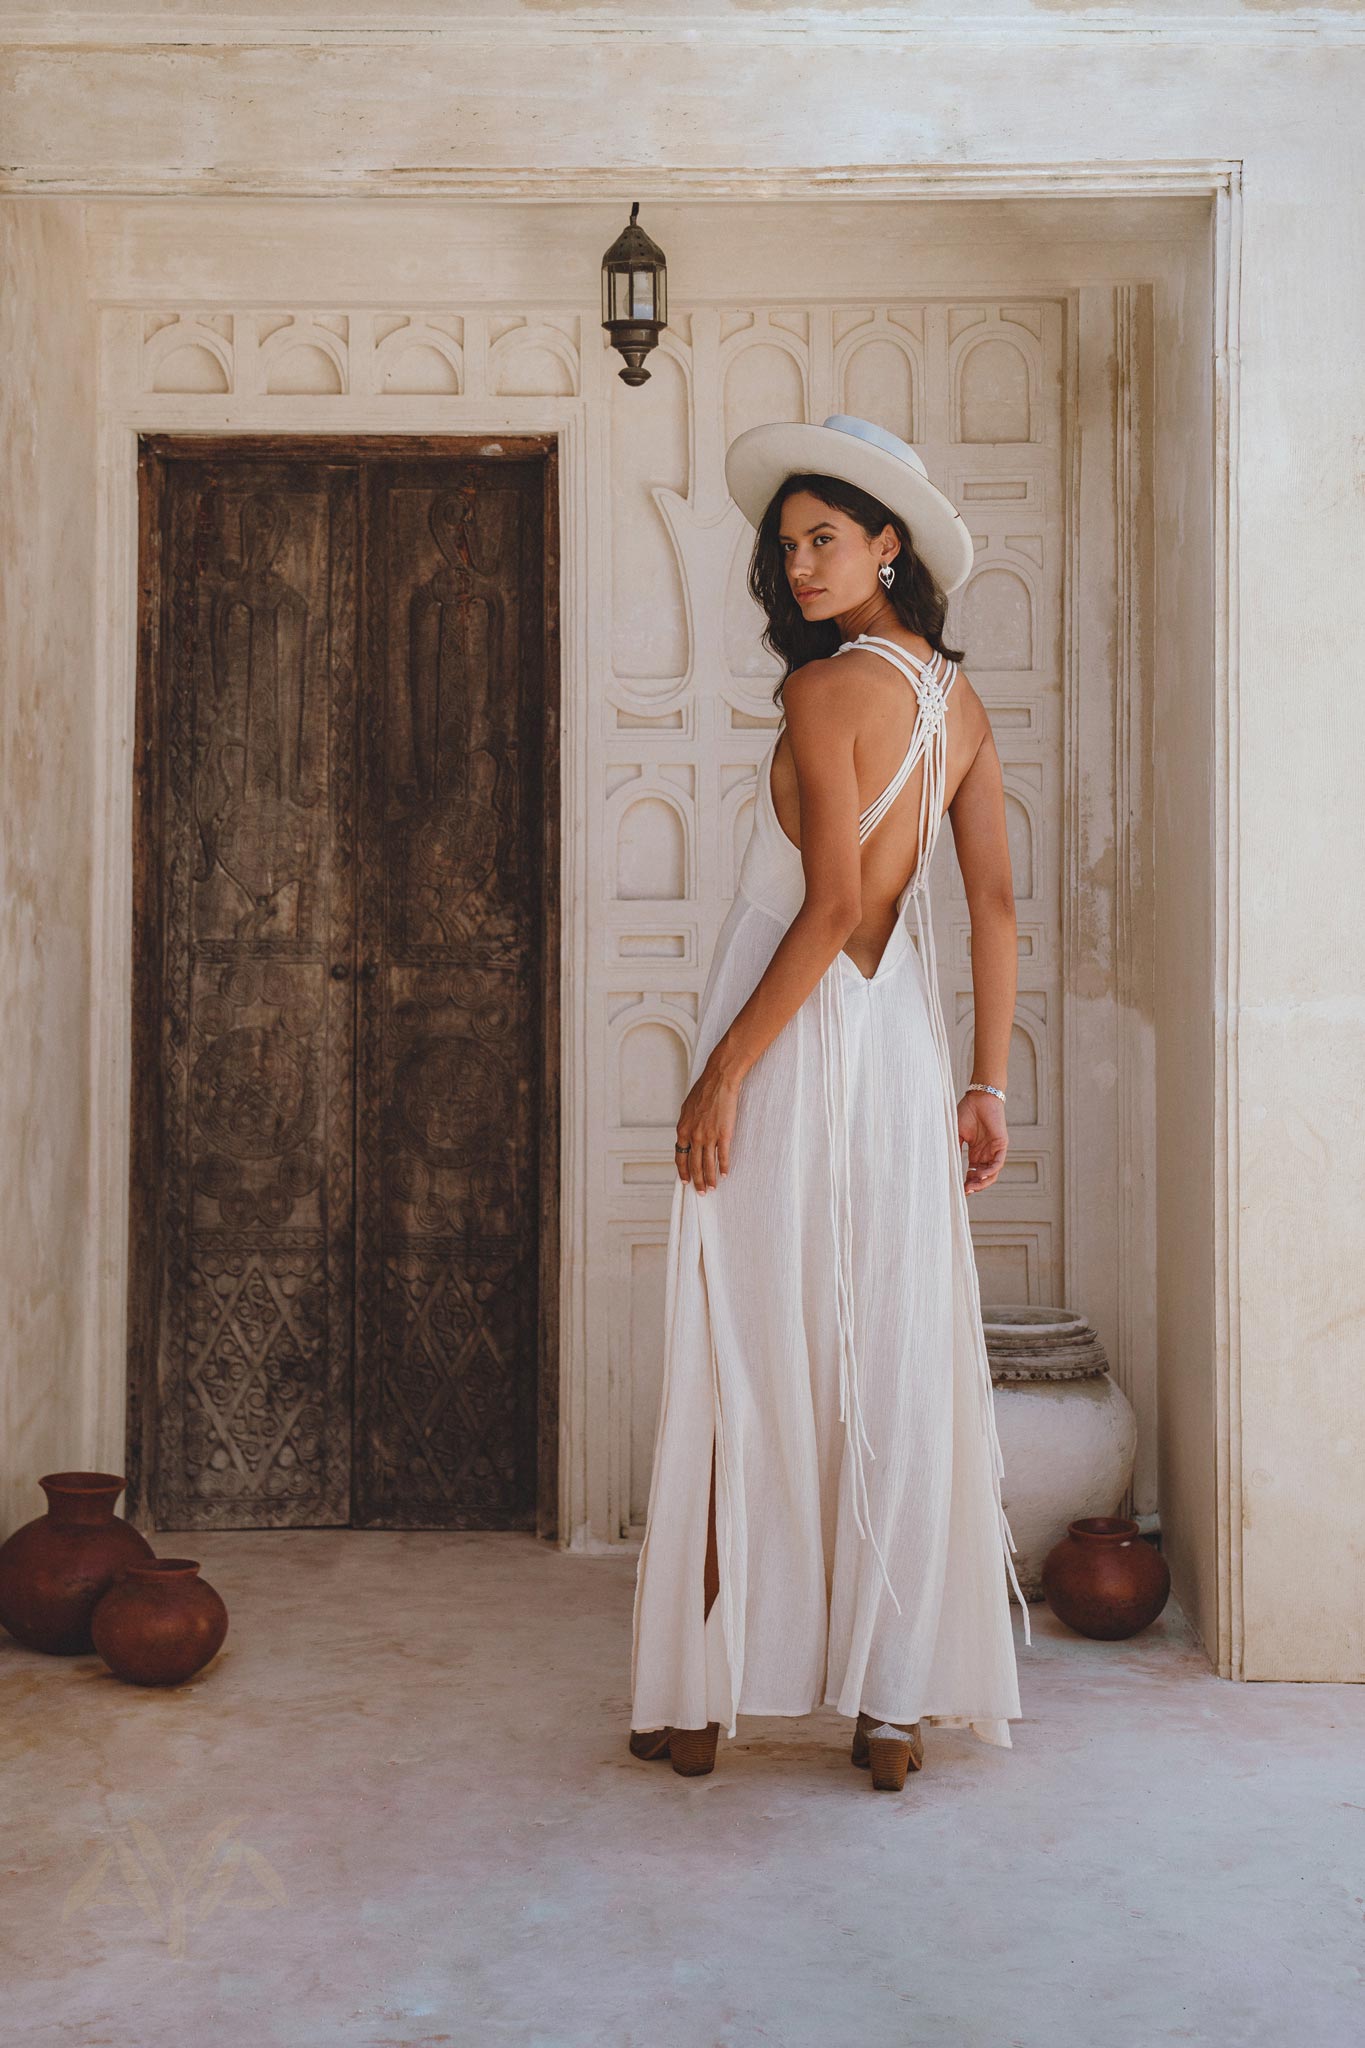 Stylish everyday dress featuring an open neckline and decorative slits on the breasts. Off-white and made with organic linen-cotton in a special dye process